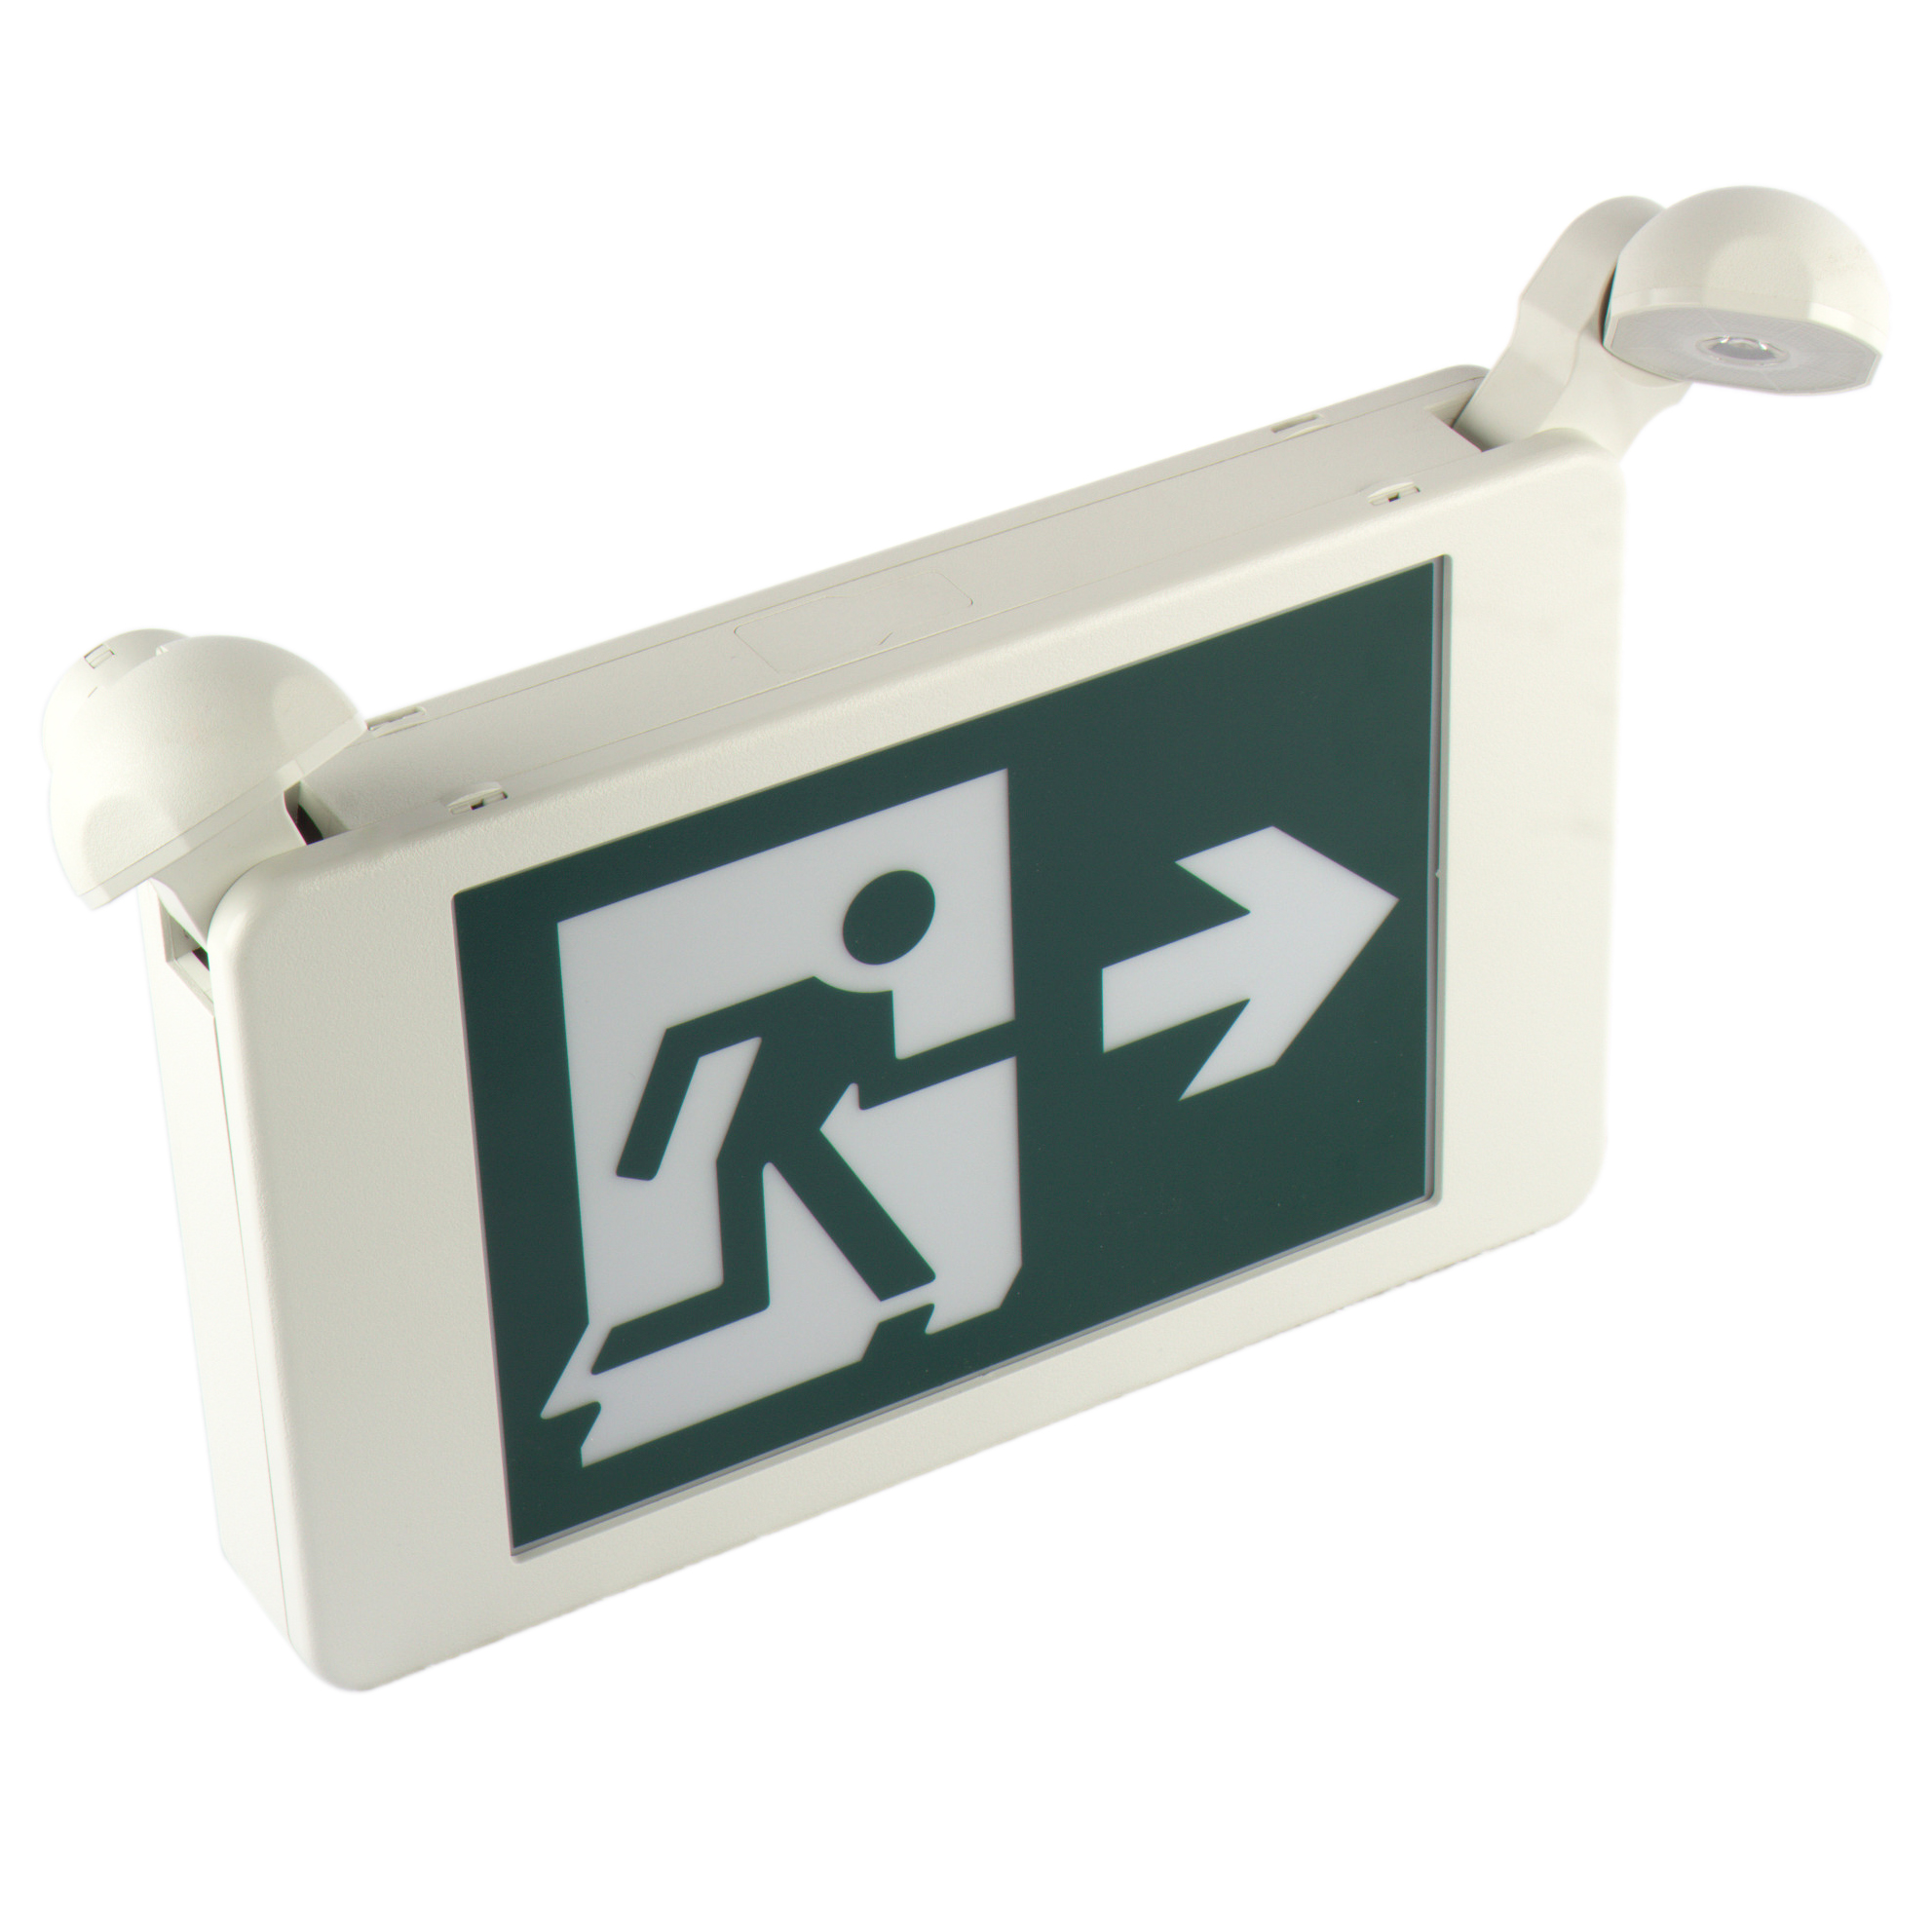 emergency exit sign plate ceiling self test emergency led light luminous exit signs contained emergency light